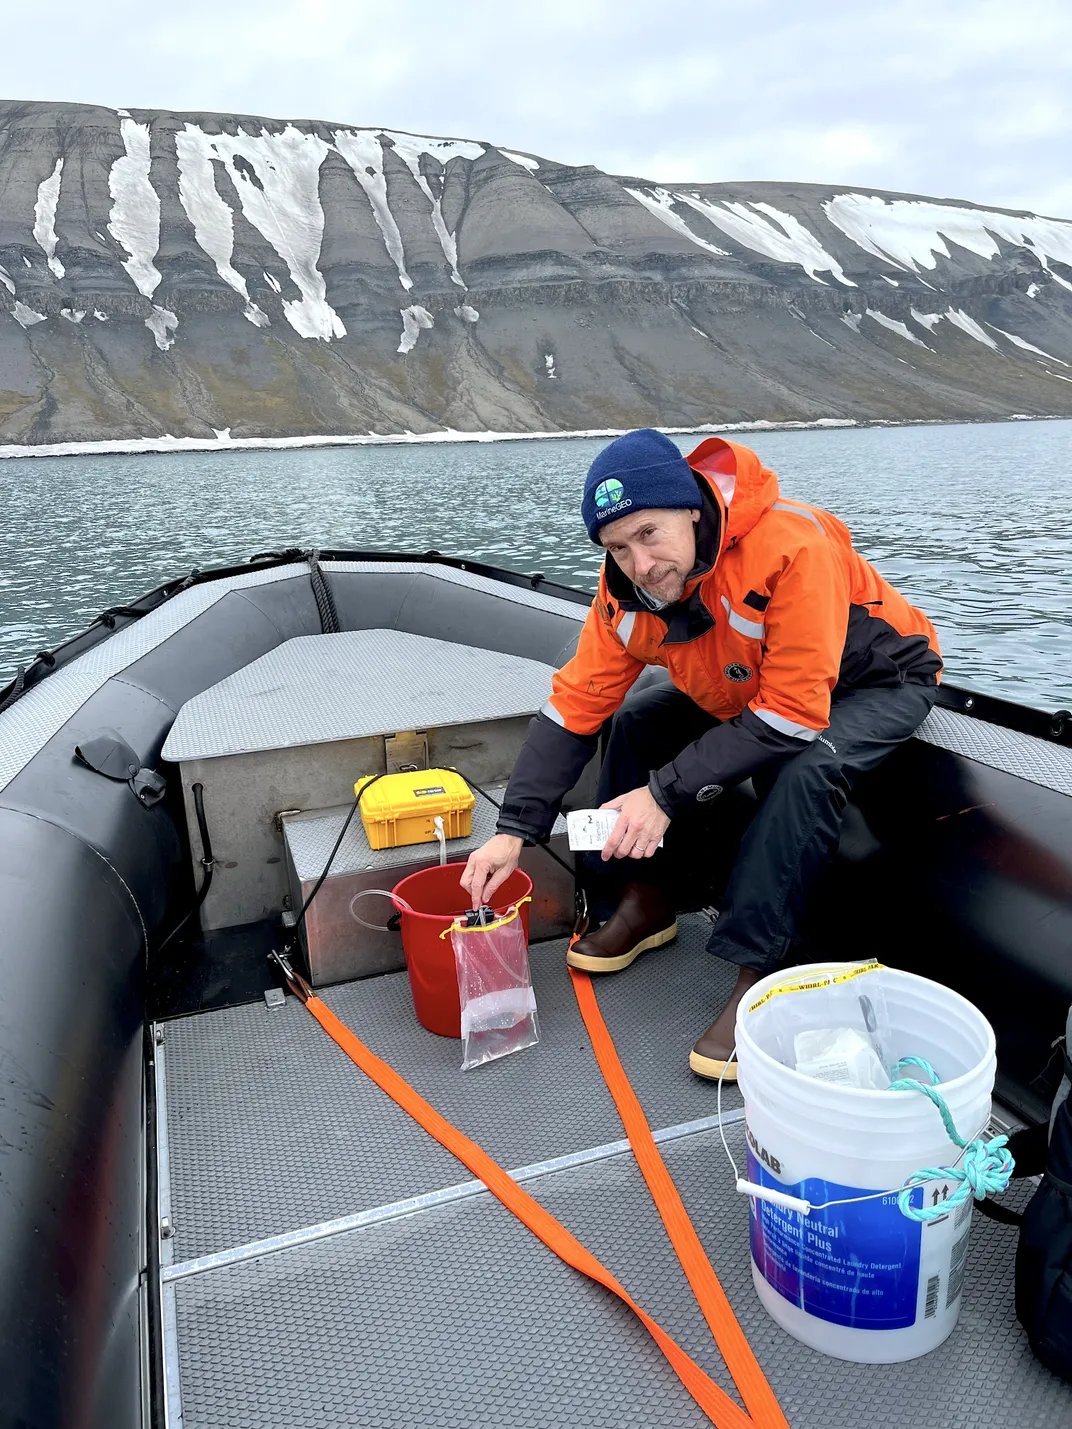 Man in orange jacket testing water sample in lifeboat, water around the boat, snowcapped mountains in the background